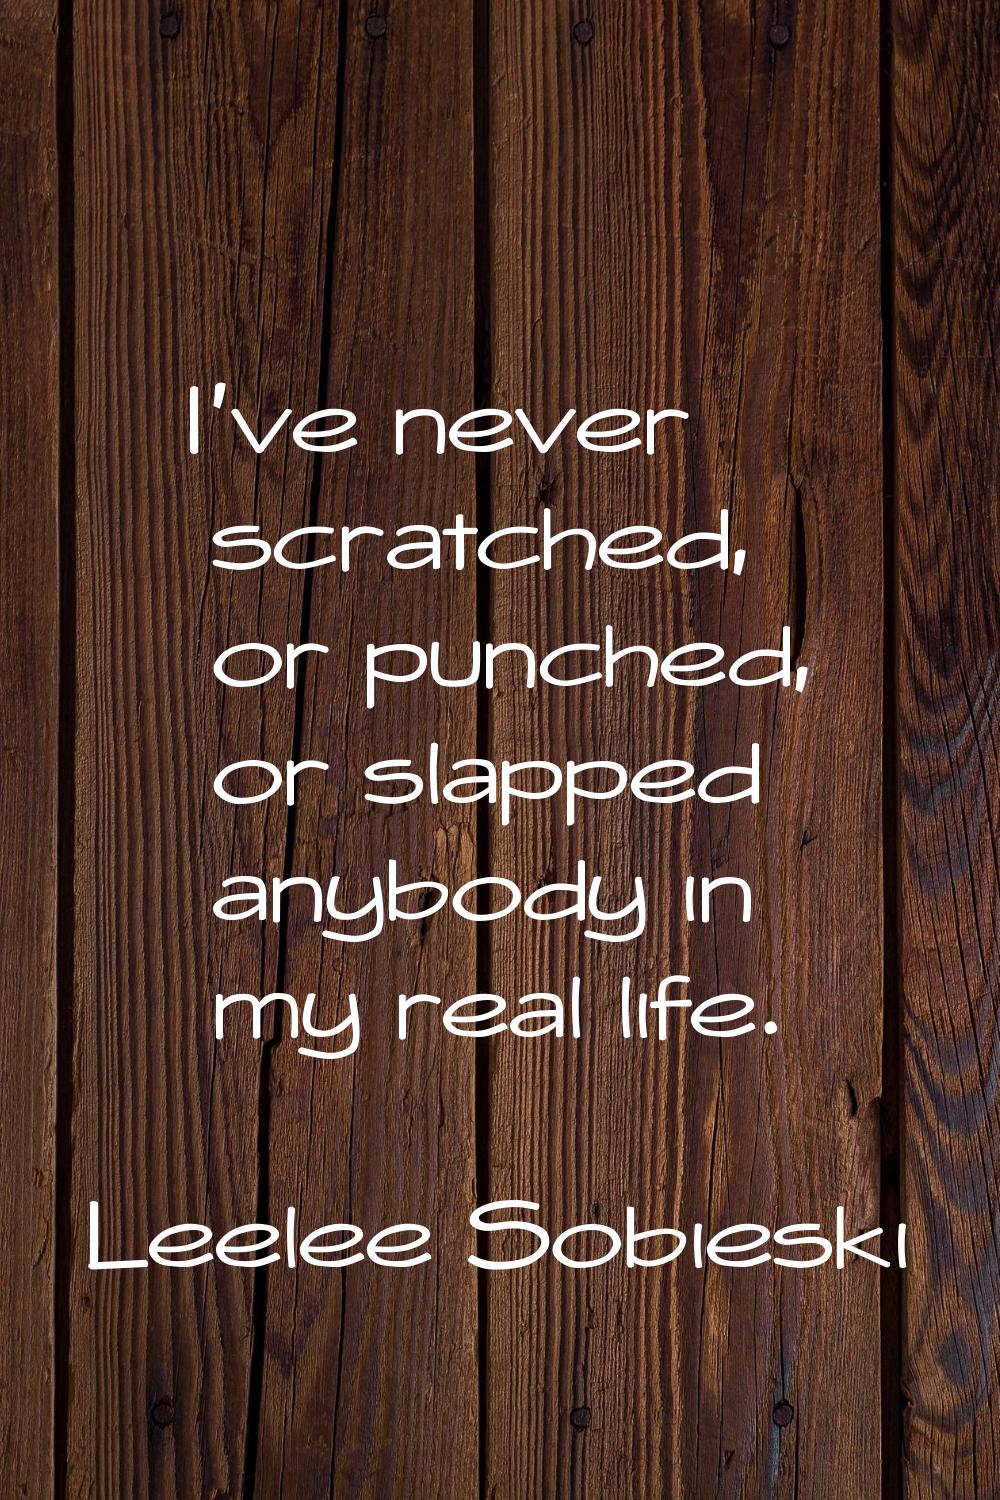 I've never scratched, or punched, or slapped anybody in my real life.